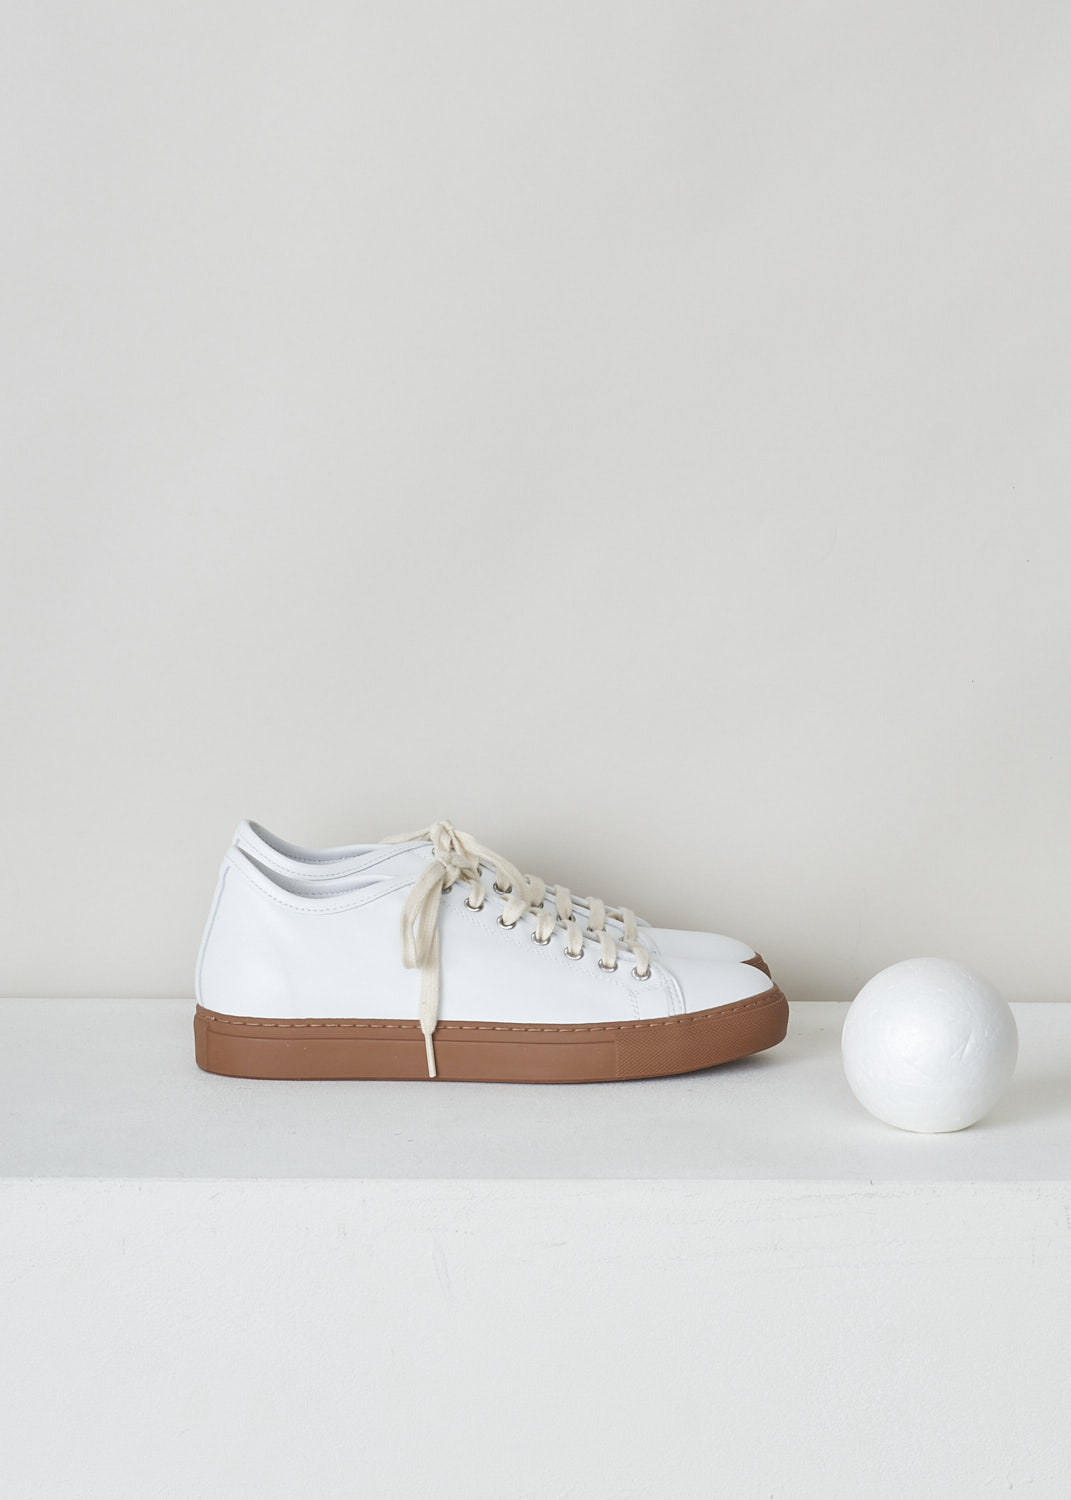 SOFIE D’HOORE, WHITE LEATHER SNEAKERS, FRIDA_LCOL_WHITE_CARAMEL, White, Brown, Side, These low-top white leather sneakers feature front lace-up fastening and a flat brown rubber sole. The sneakers come with additional pair of black laces.
